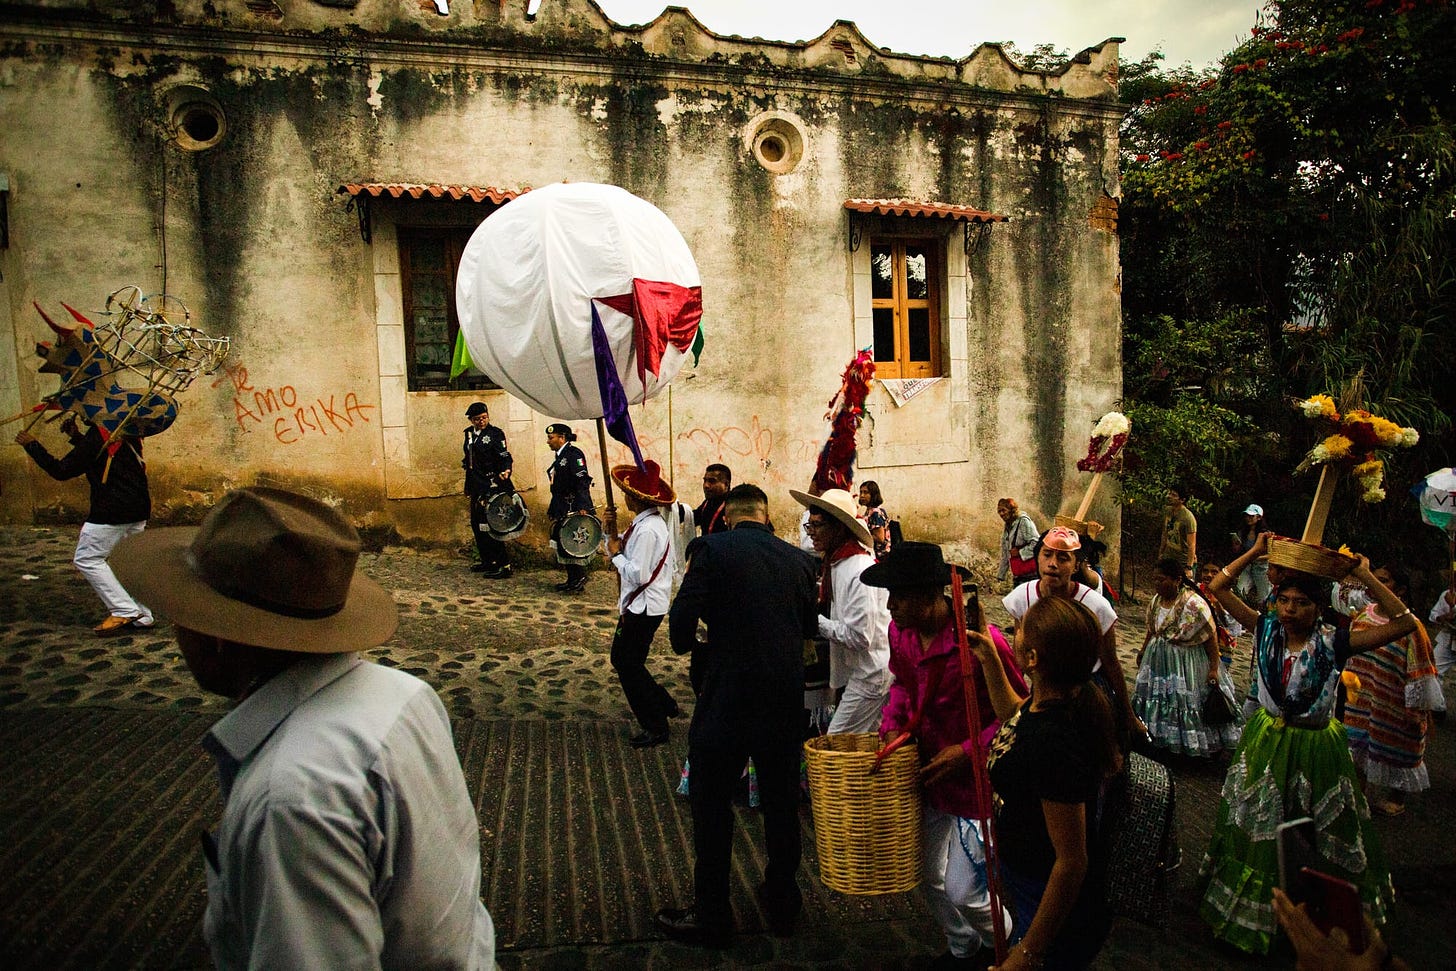 Go see the Aztecs! A Christmas story from Tepoztlán and a New Year's Message